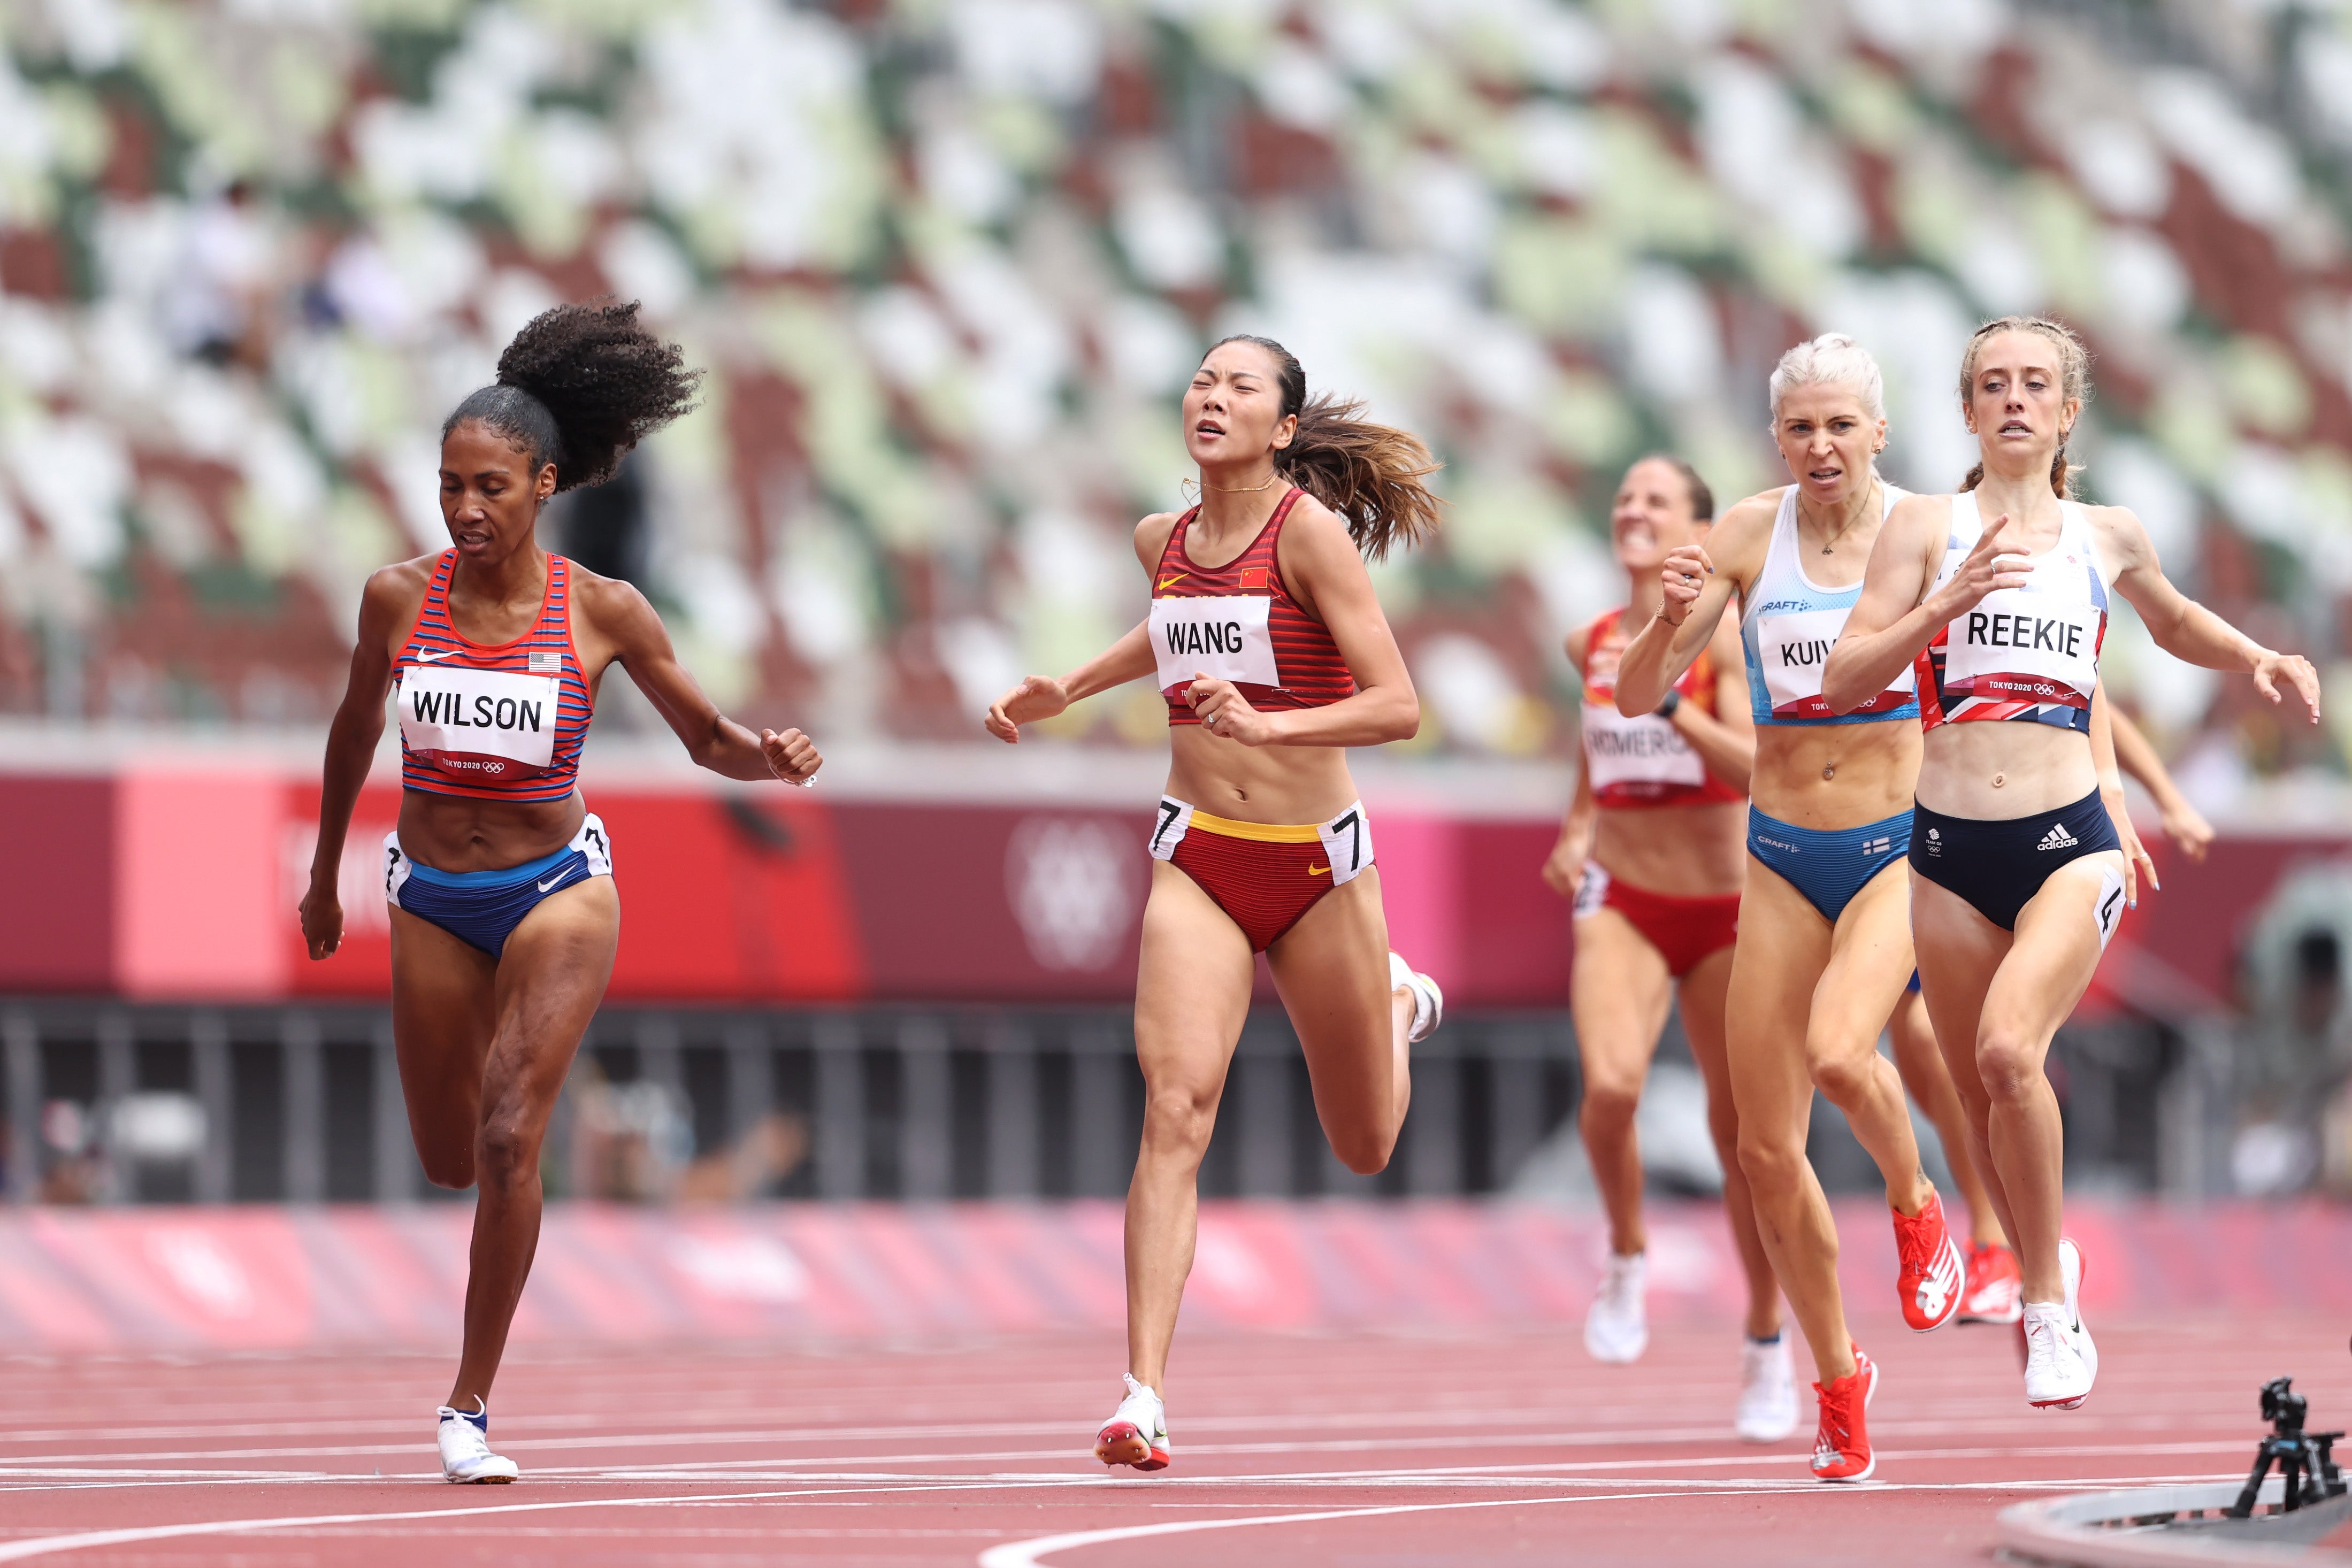 File: Ajee Wilson of Team United States and Chunyu Wang of Team China compete during the Women's 800m heats at the Tokyo 2020 Olympic Games